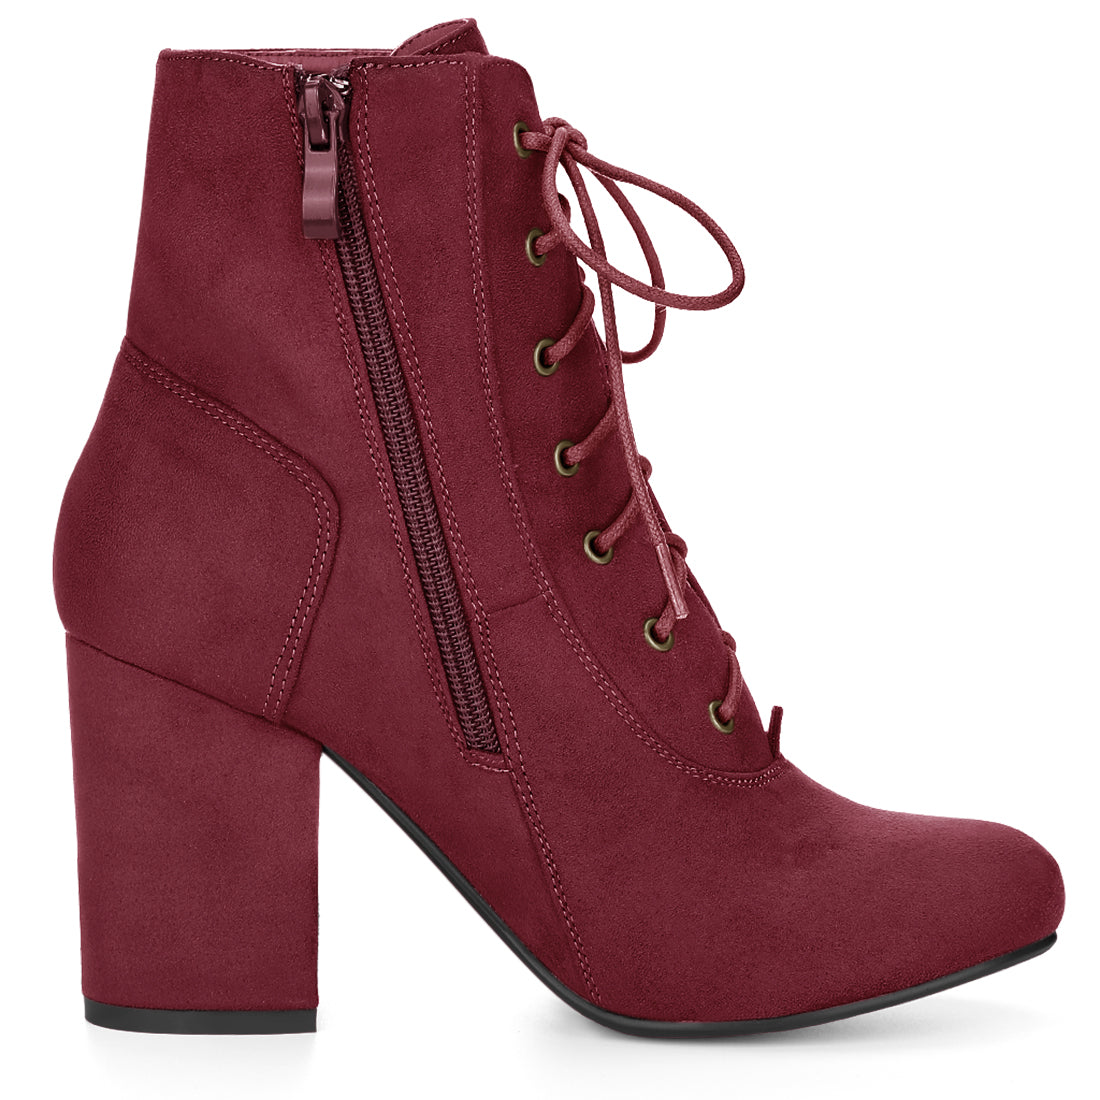 Allegra K Faux Suede Round Toe Lace Up Chunky Heel Ankle Booties